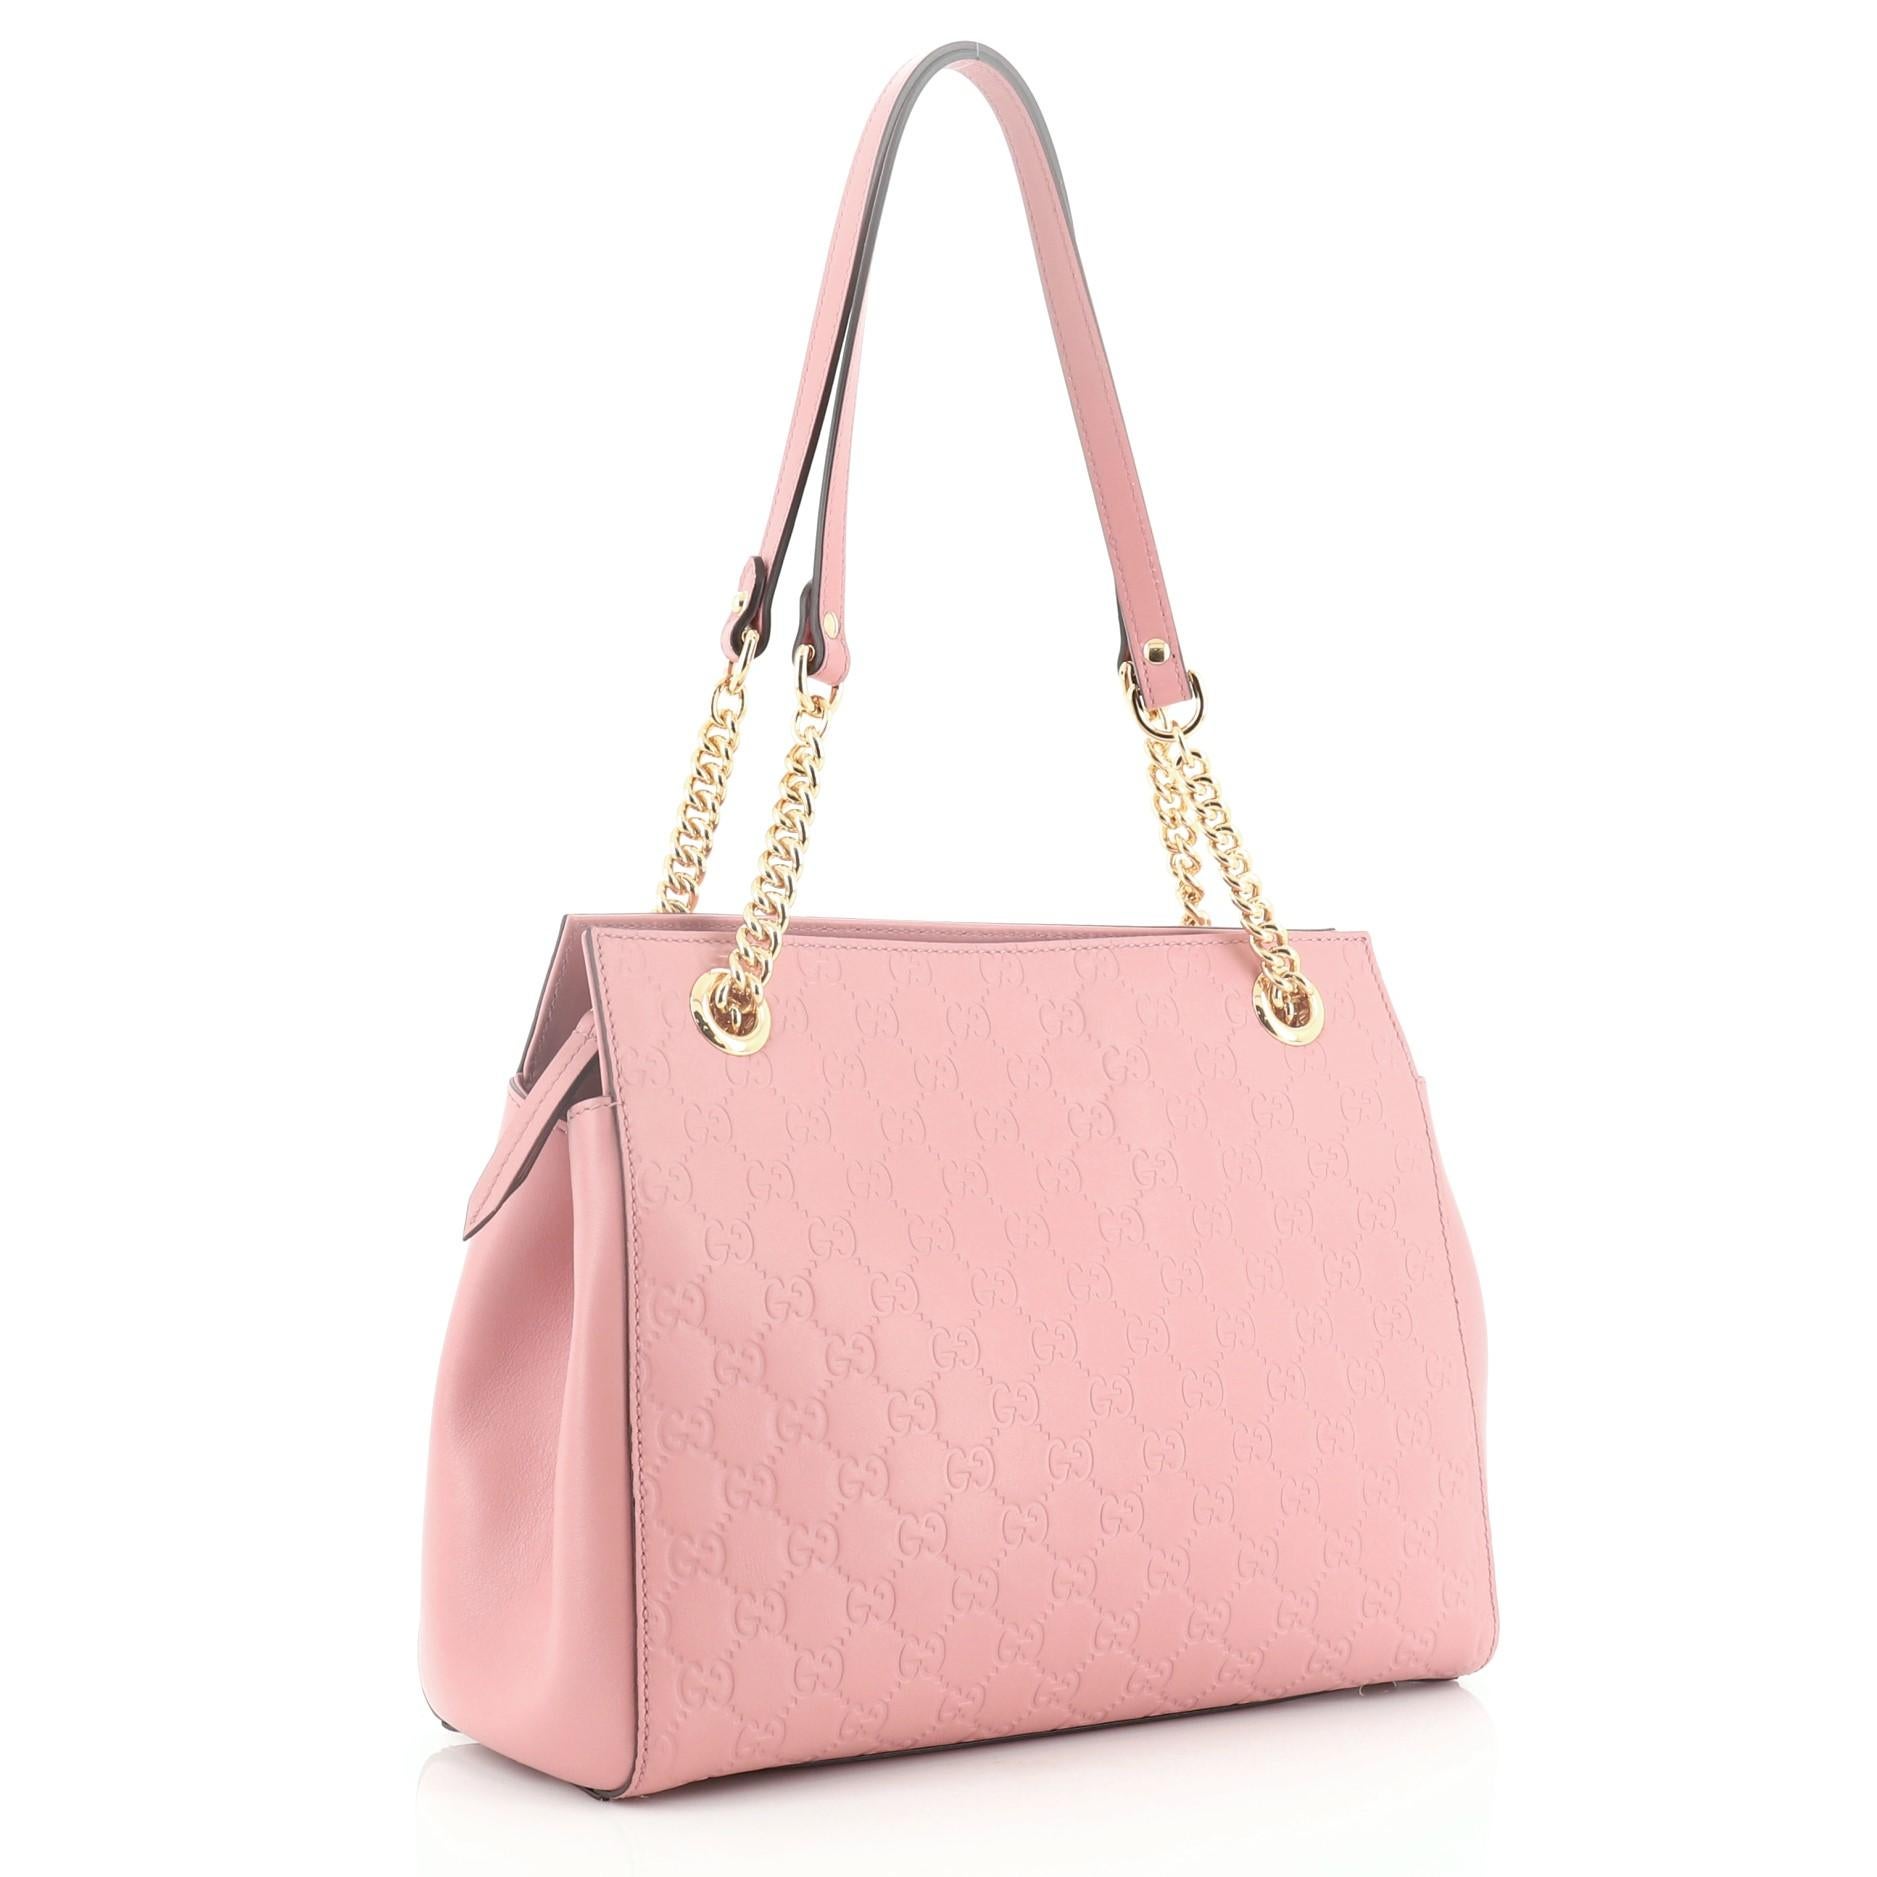 This Gucci Soft Signature Shoulder Bag Guccissima Leather Medium, crafted from pink guccissima leather, features dual chain-link shoulder straps with leather pads and gold-tone hardware. Its zip closure opens to a neutral microfiber interior with